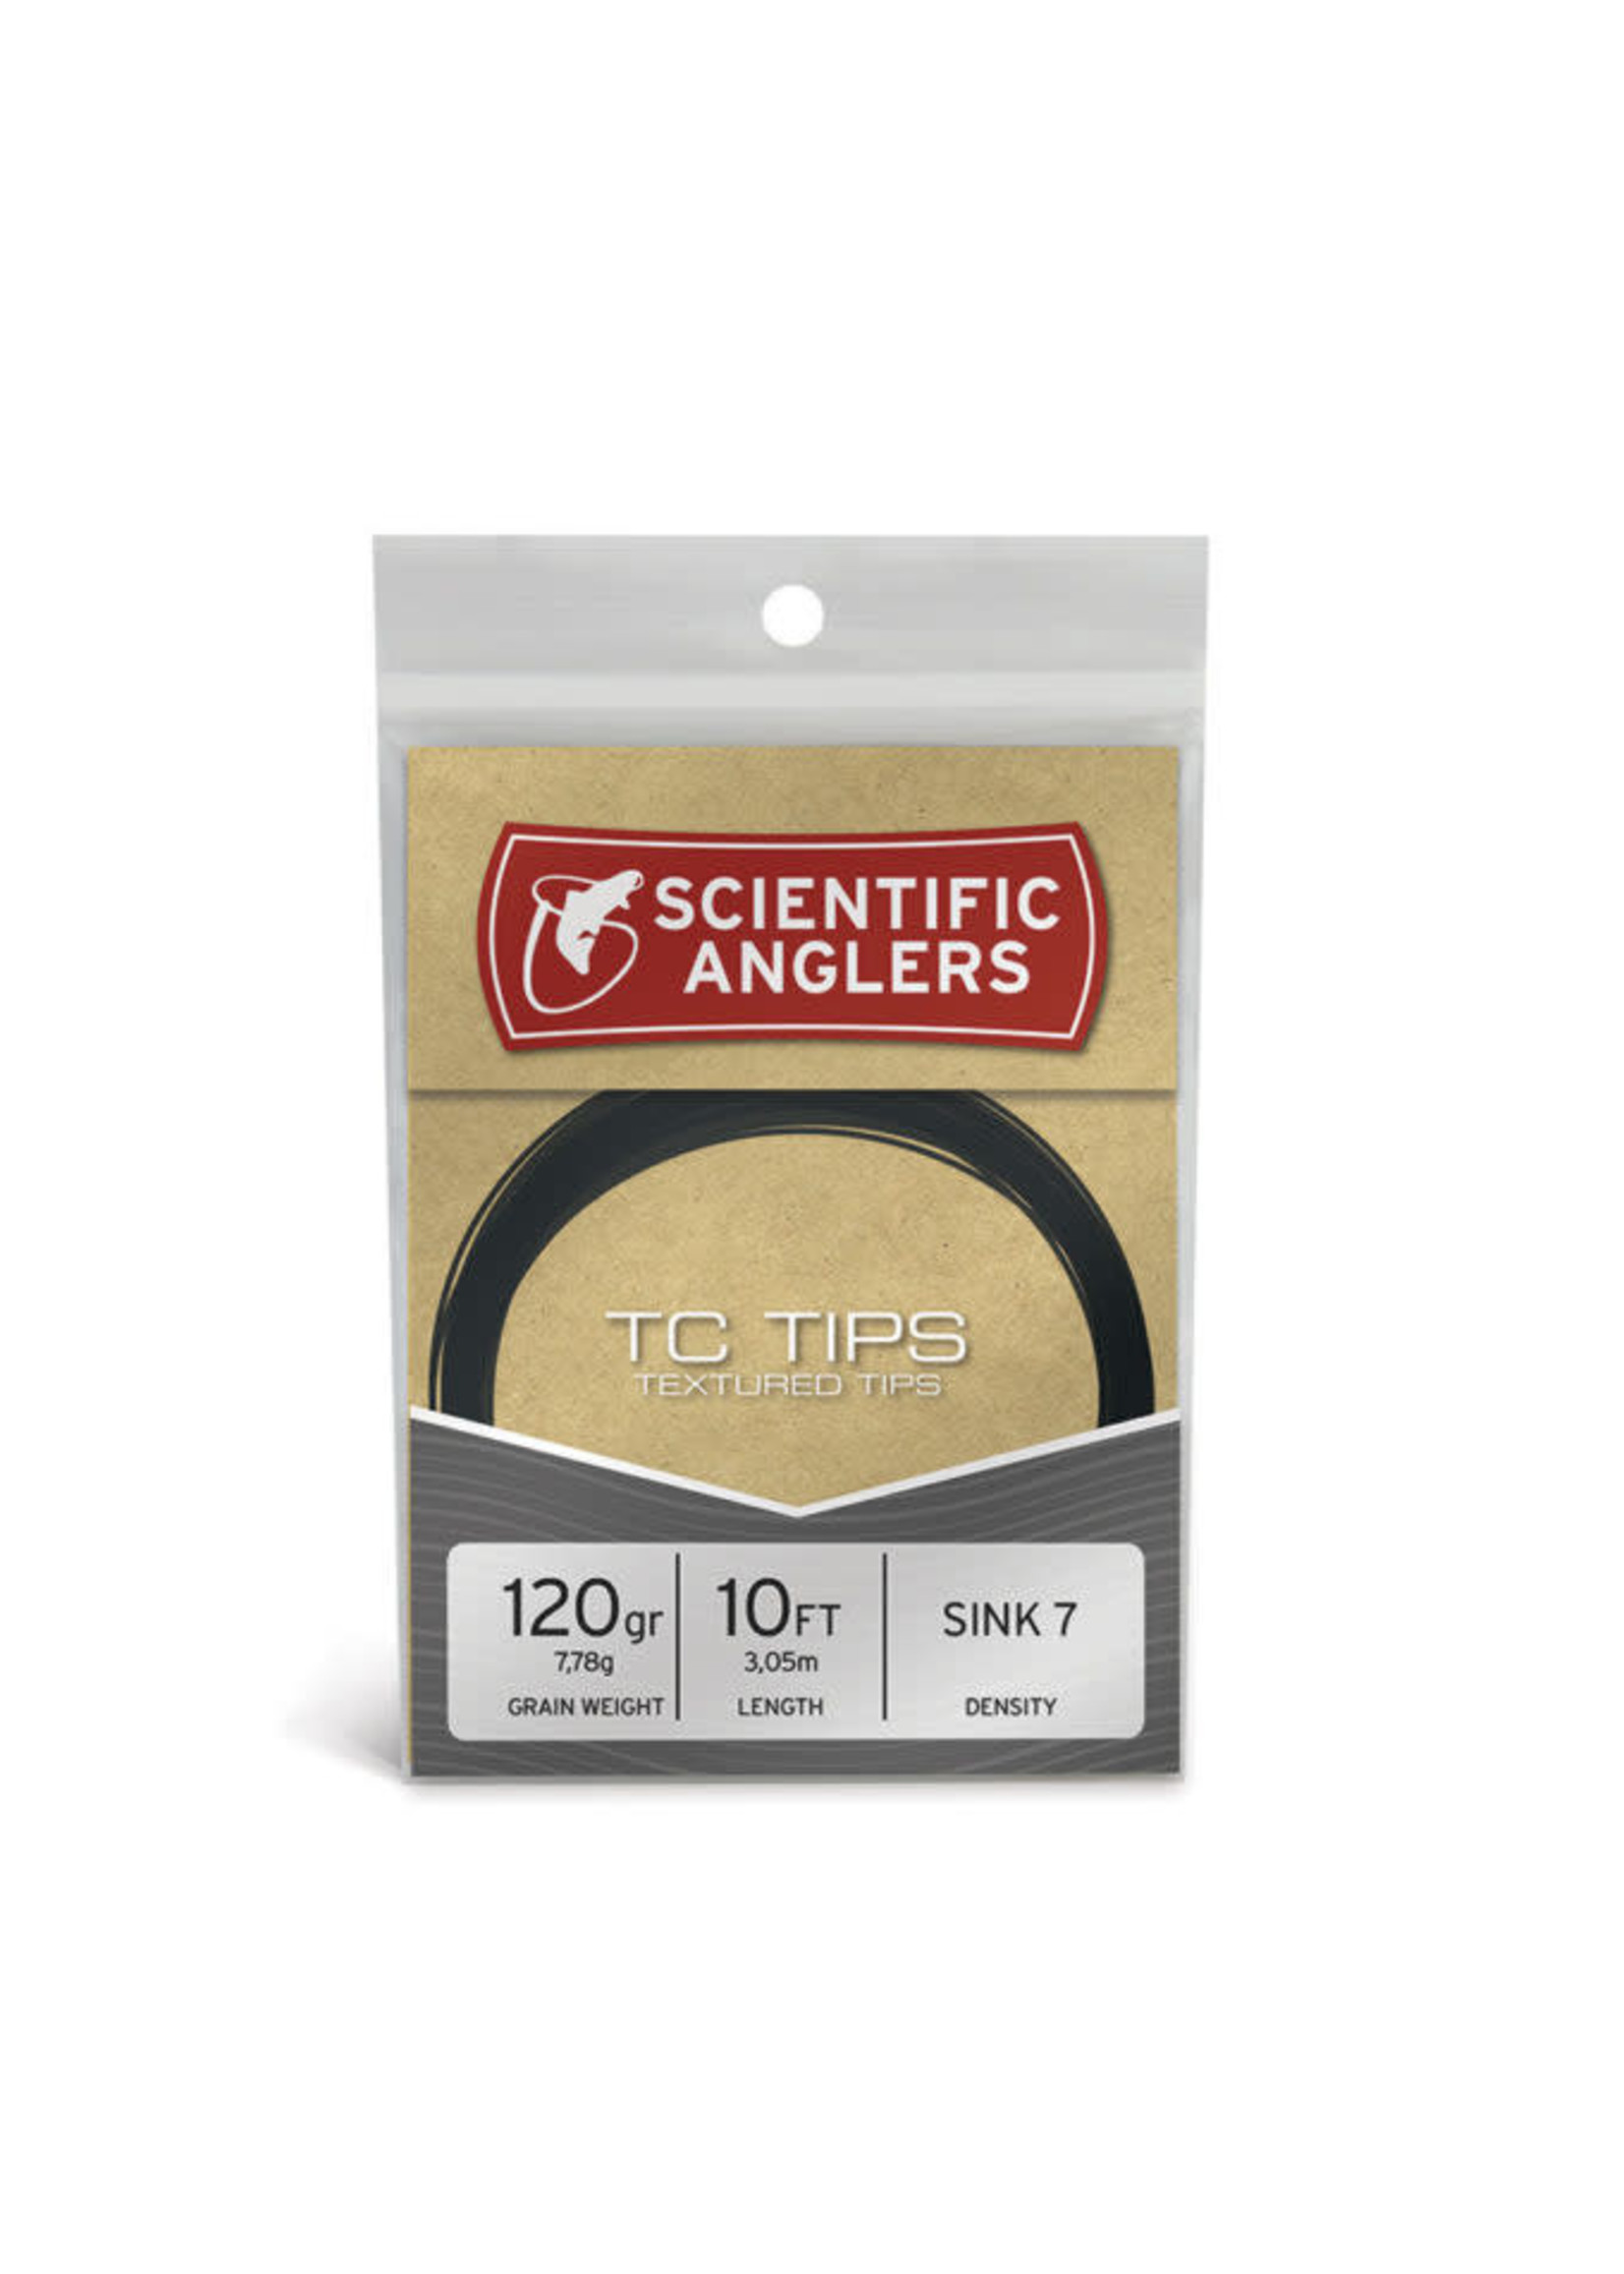 Scientific Anglers Scientific Anglers TC Textured Tips